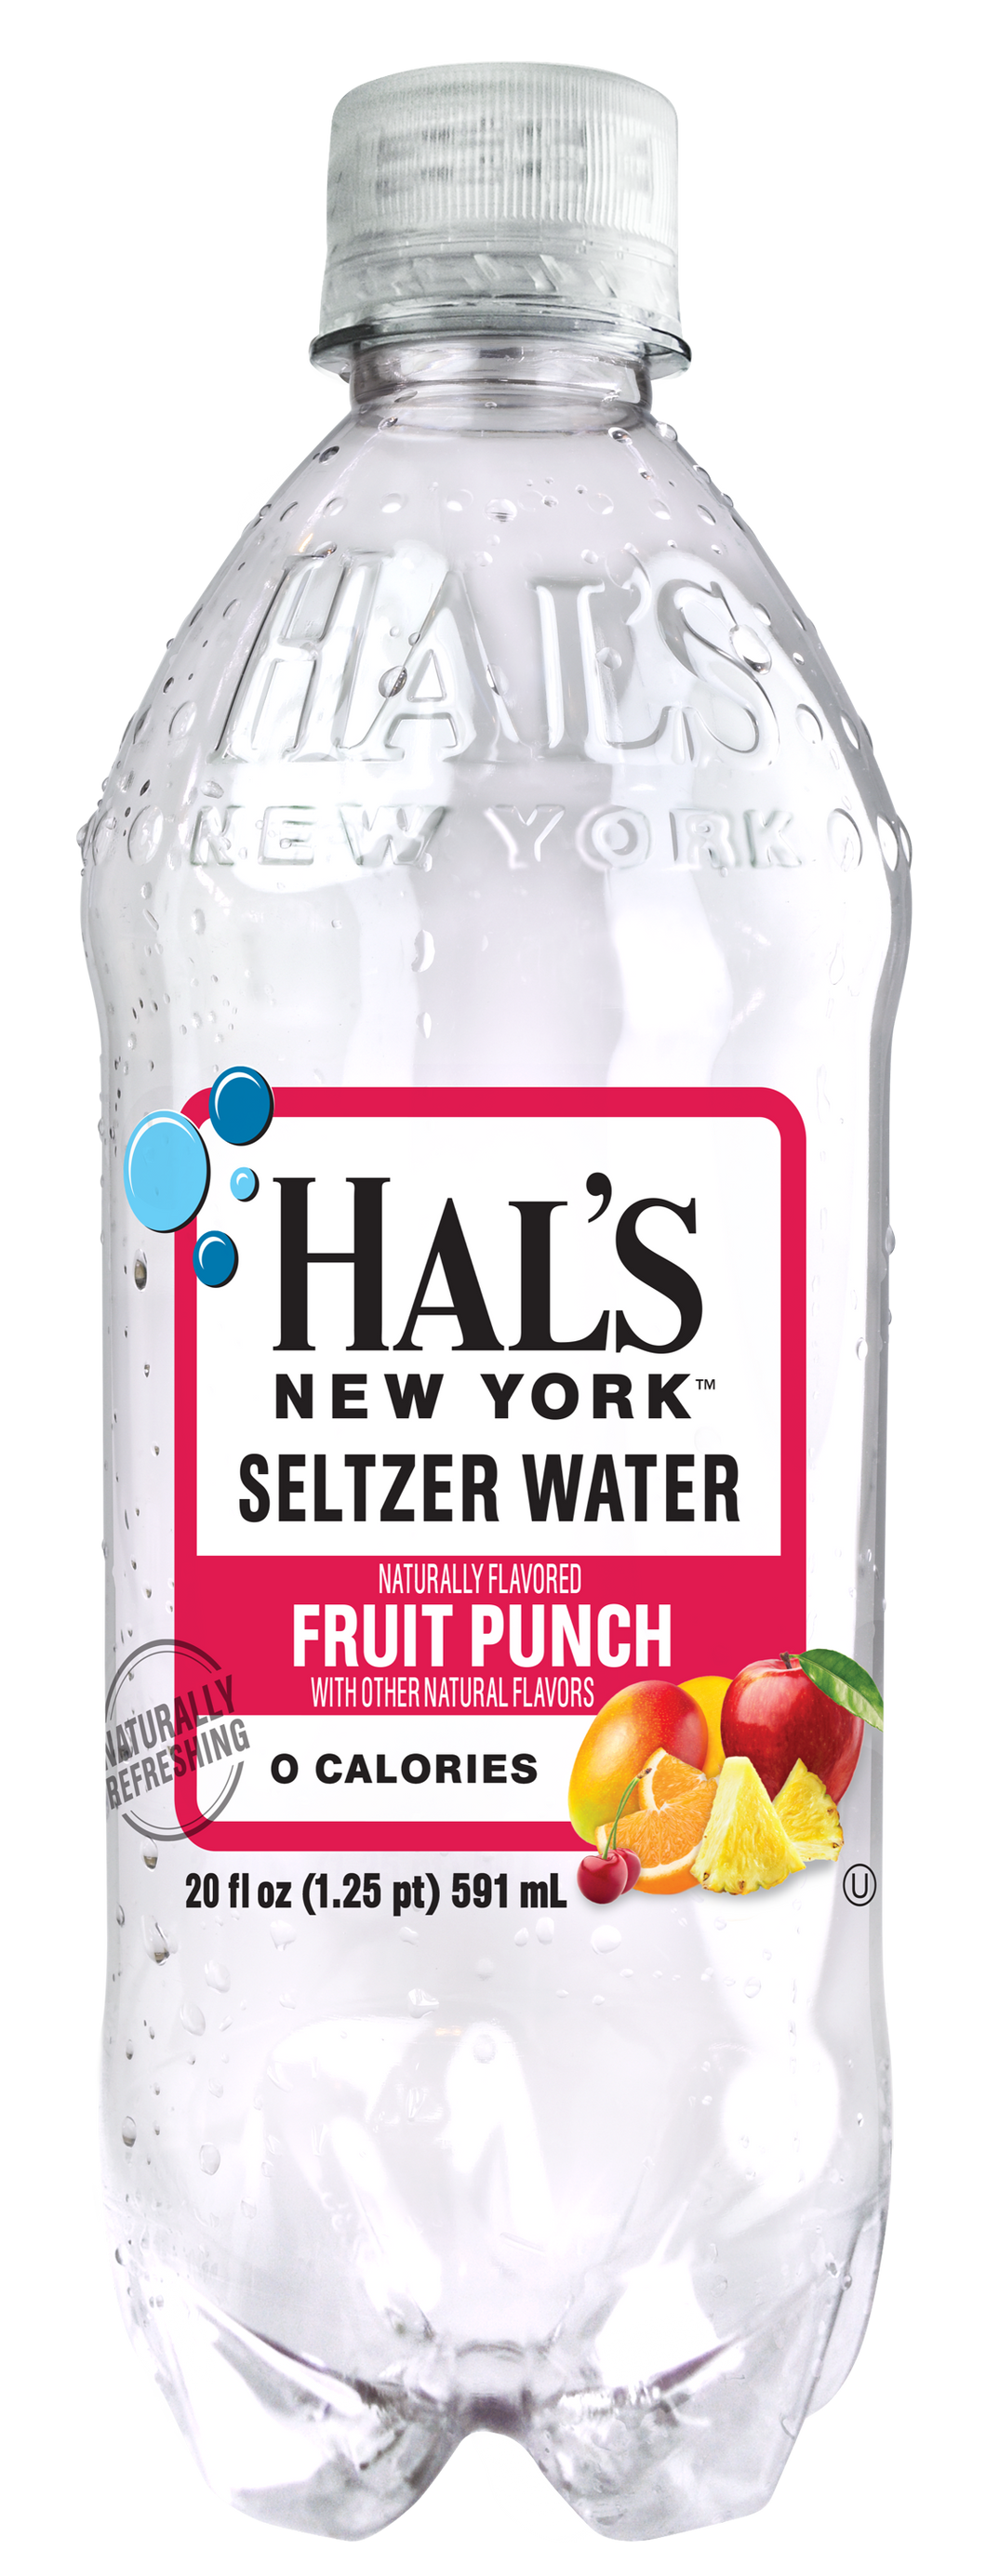 Hal's New York Seltzer Water 20oz FRUIT PUNCH